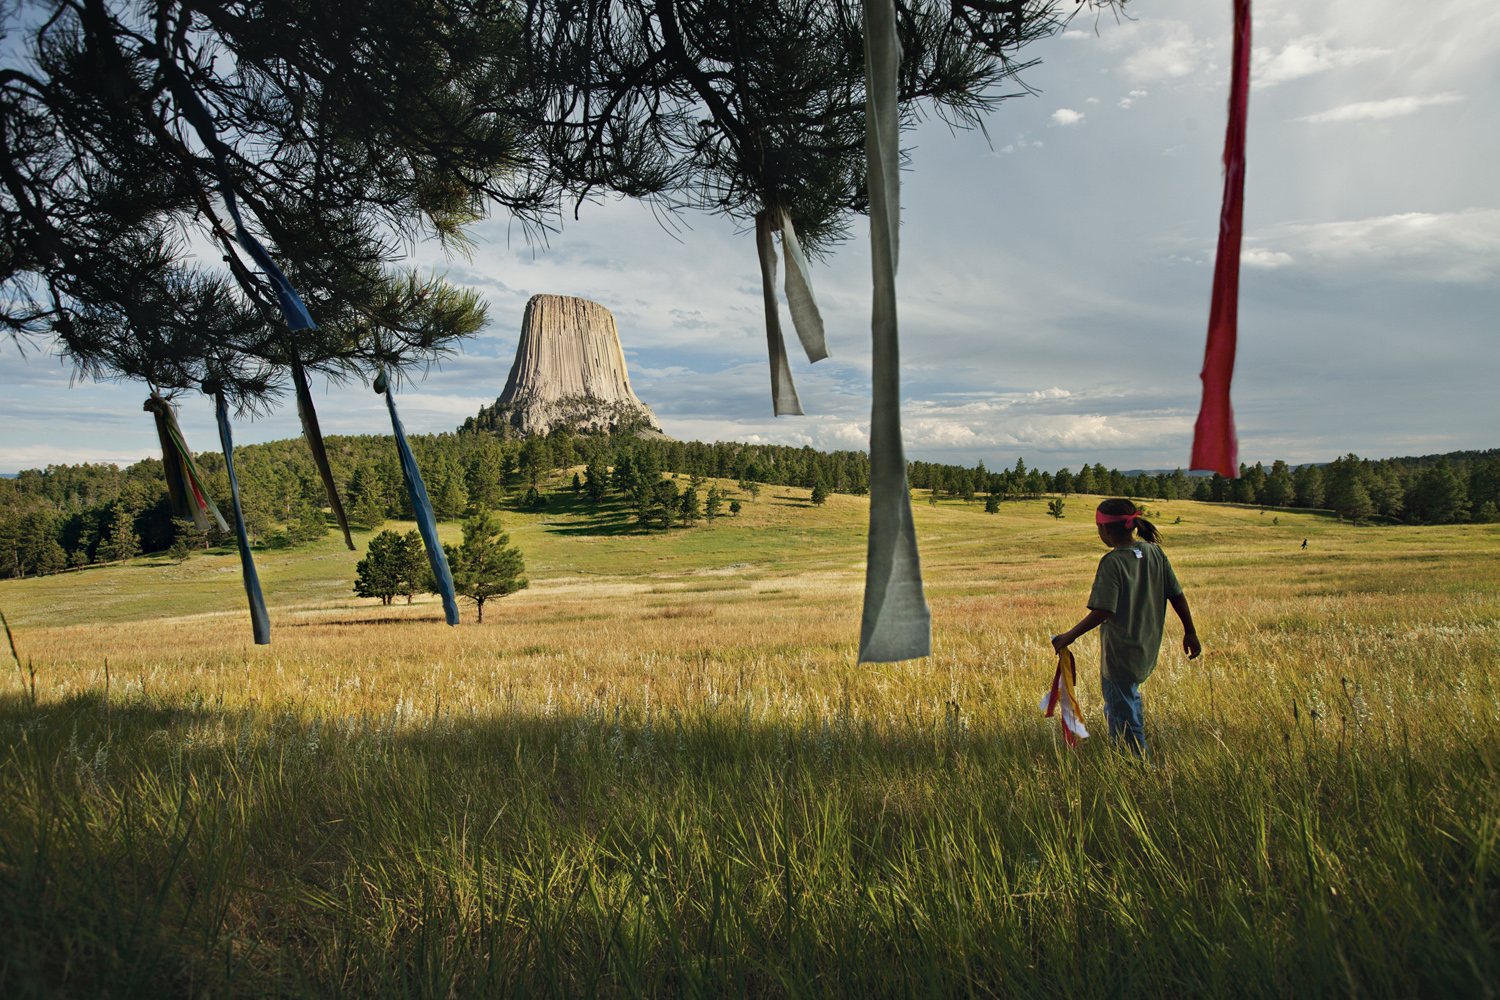 PRINT Nine-year-old Wakinyan Two Bulls places prayer flags in a tree near Mato Tipila ("bear lodge"), or Devils Tower, in Wyoming. The story of the OglalaÑtheir spirituality and their fight to remedy old wrongsÑgoes well beyond the Pine Ridge Reservation.